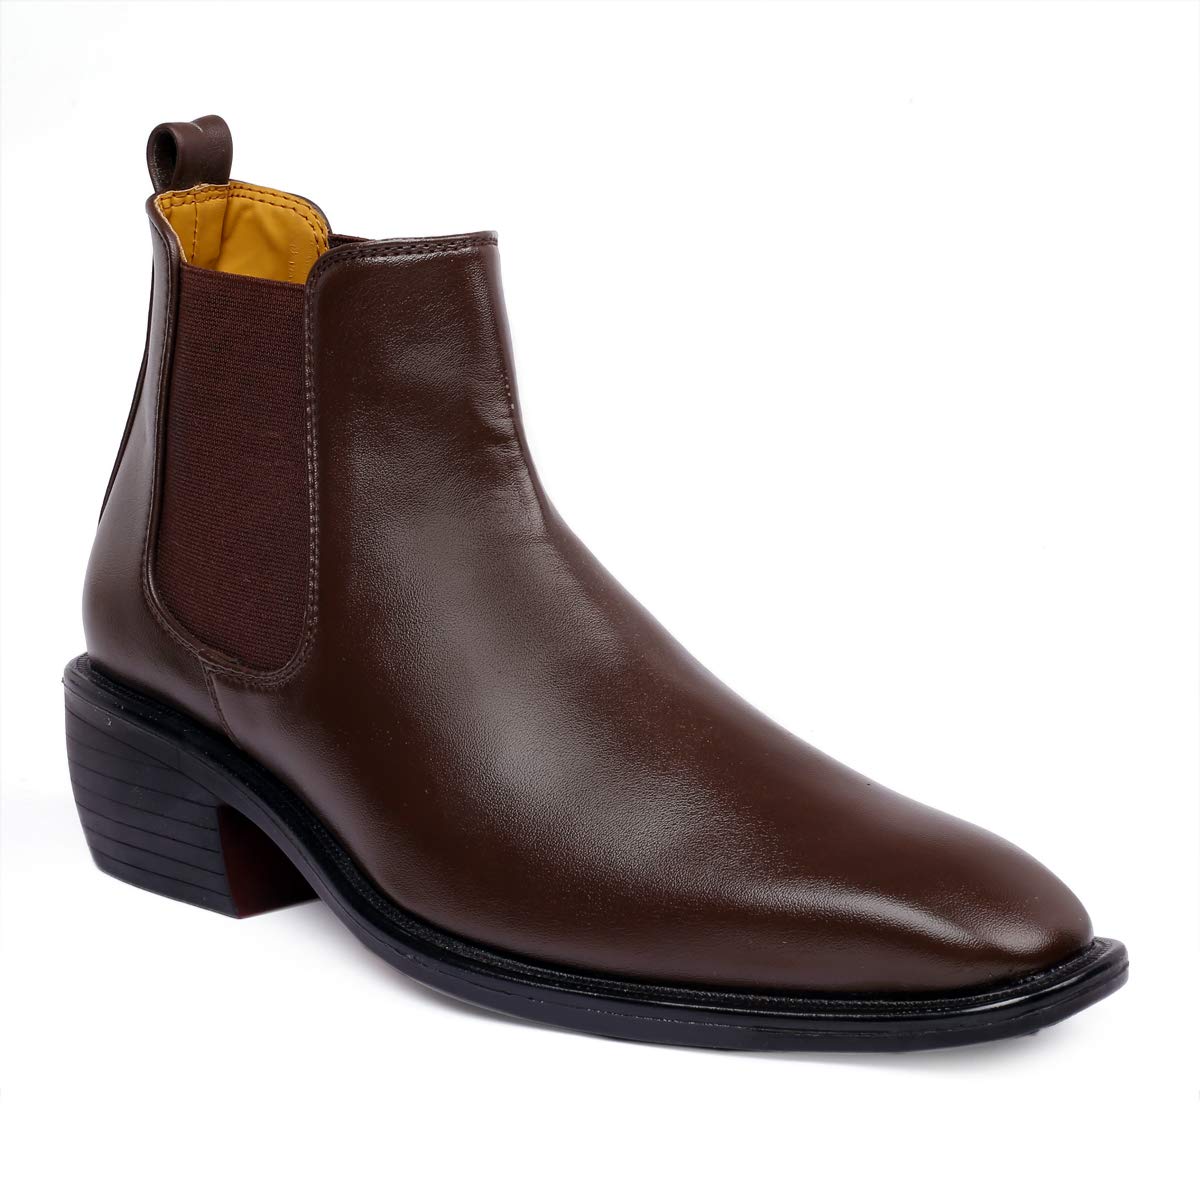 Classy Hight Ankle Height Increasing Brown Chelsea Boots For Men-Unique and Classy